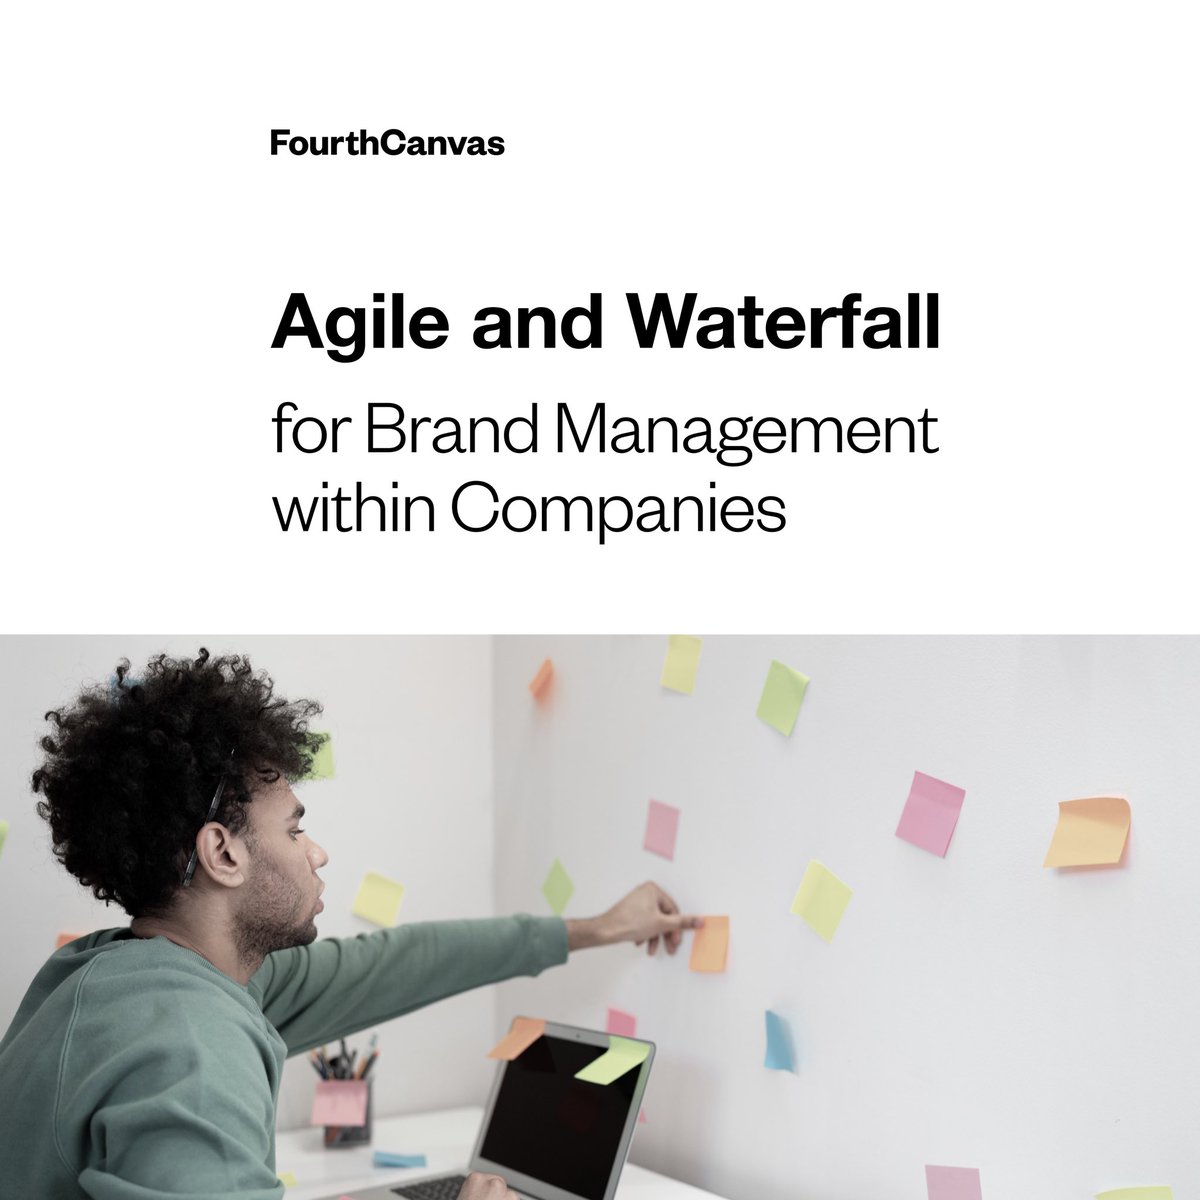 [A thread] Navigating branding projects can be an overwhelming task, especially when faced with heavy deliverables and short timelines. 

Let’s explore the agile and waterfall frameworks together to determine the most suitable path for your team.👇🏽

1/8

#agileleadership #agile